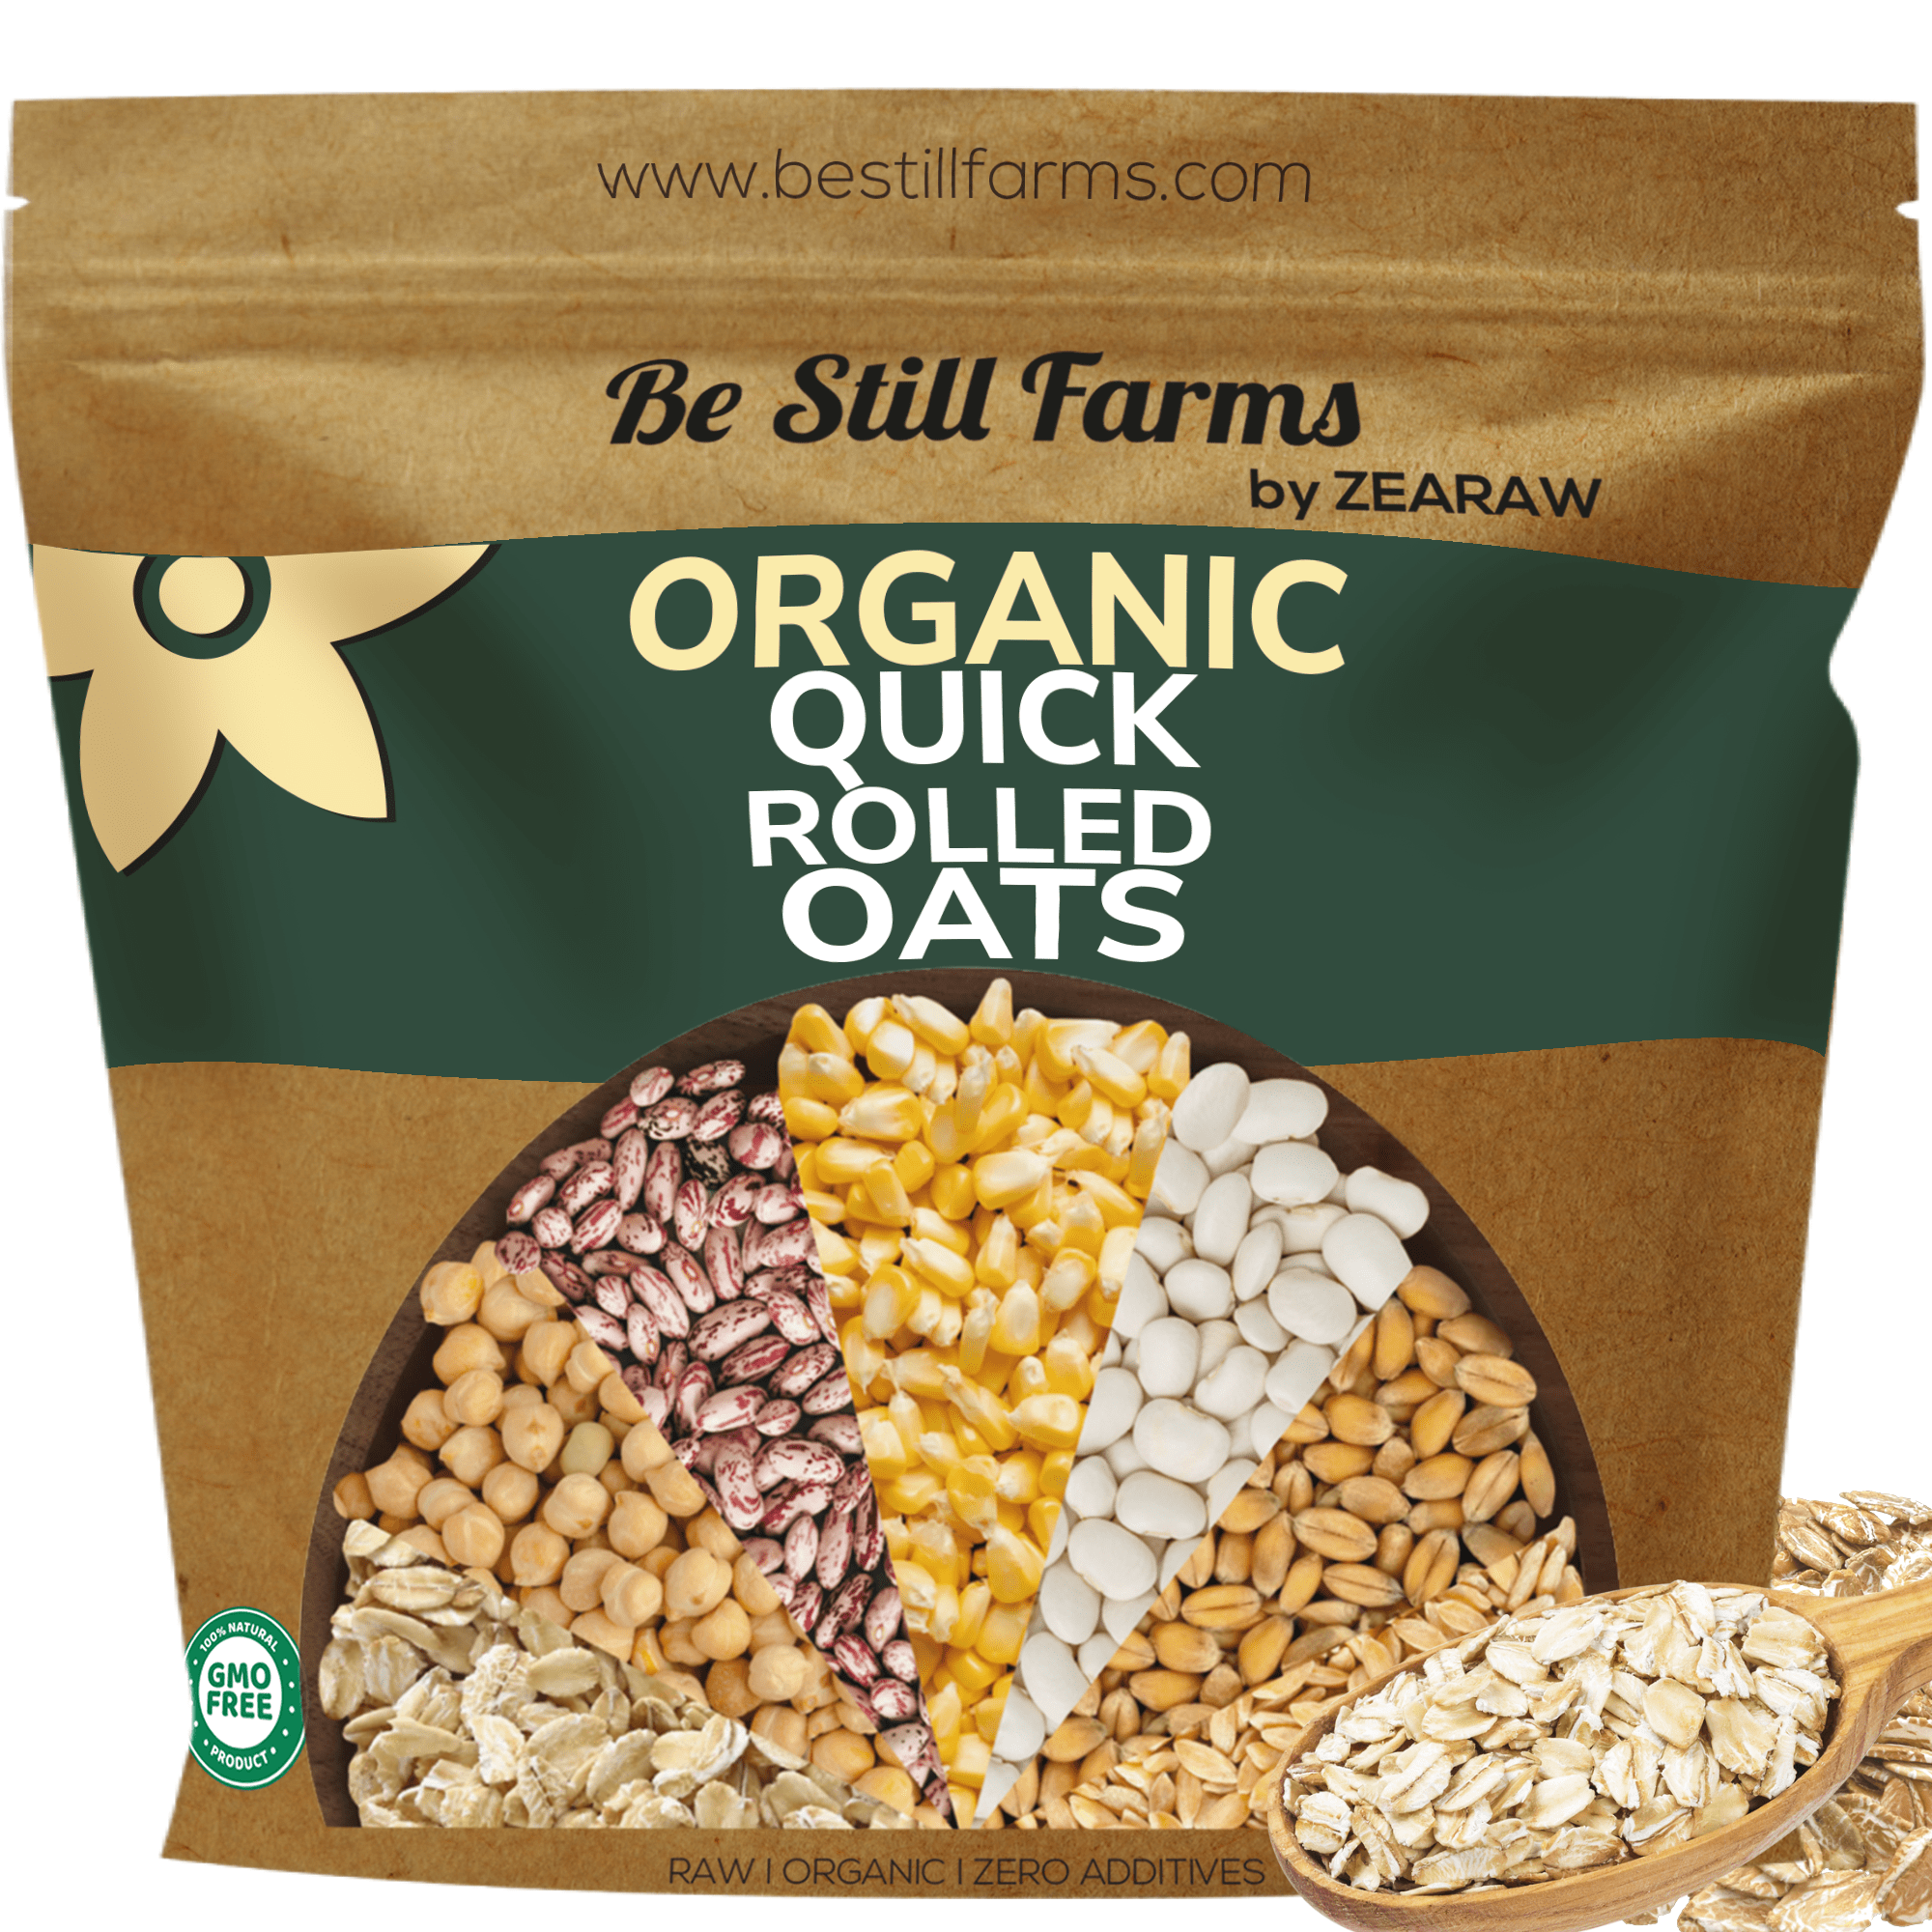 Quick Rolled Oats - Be Still Farms